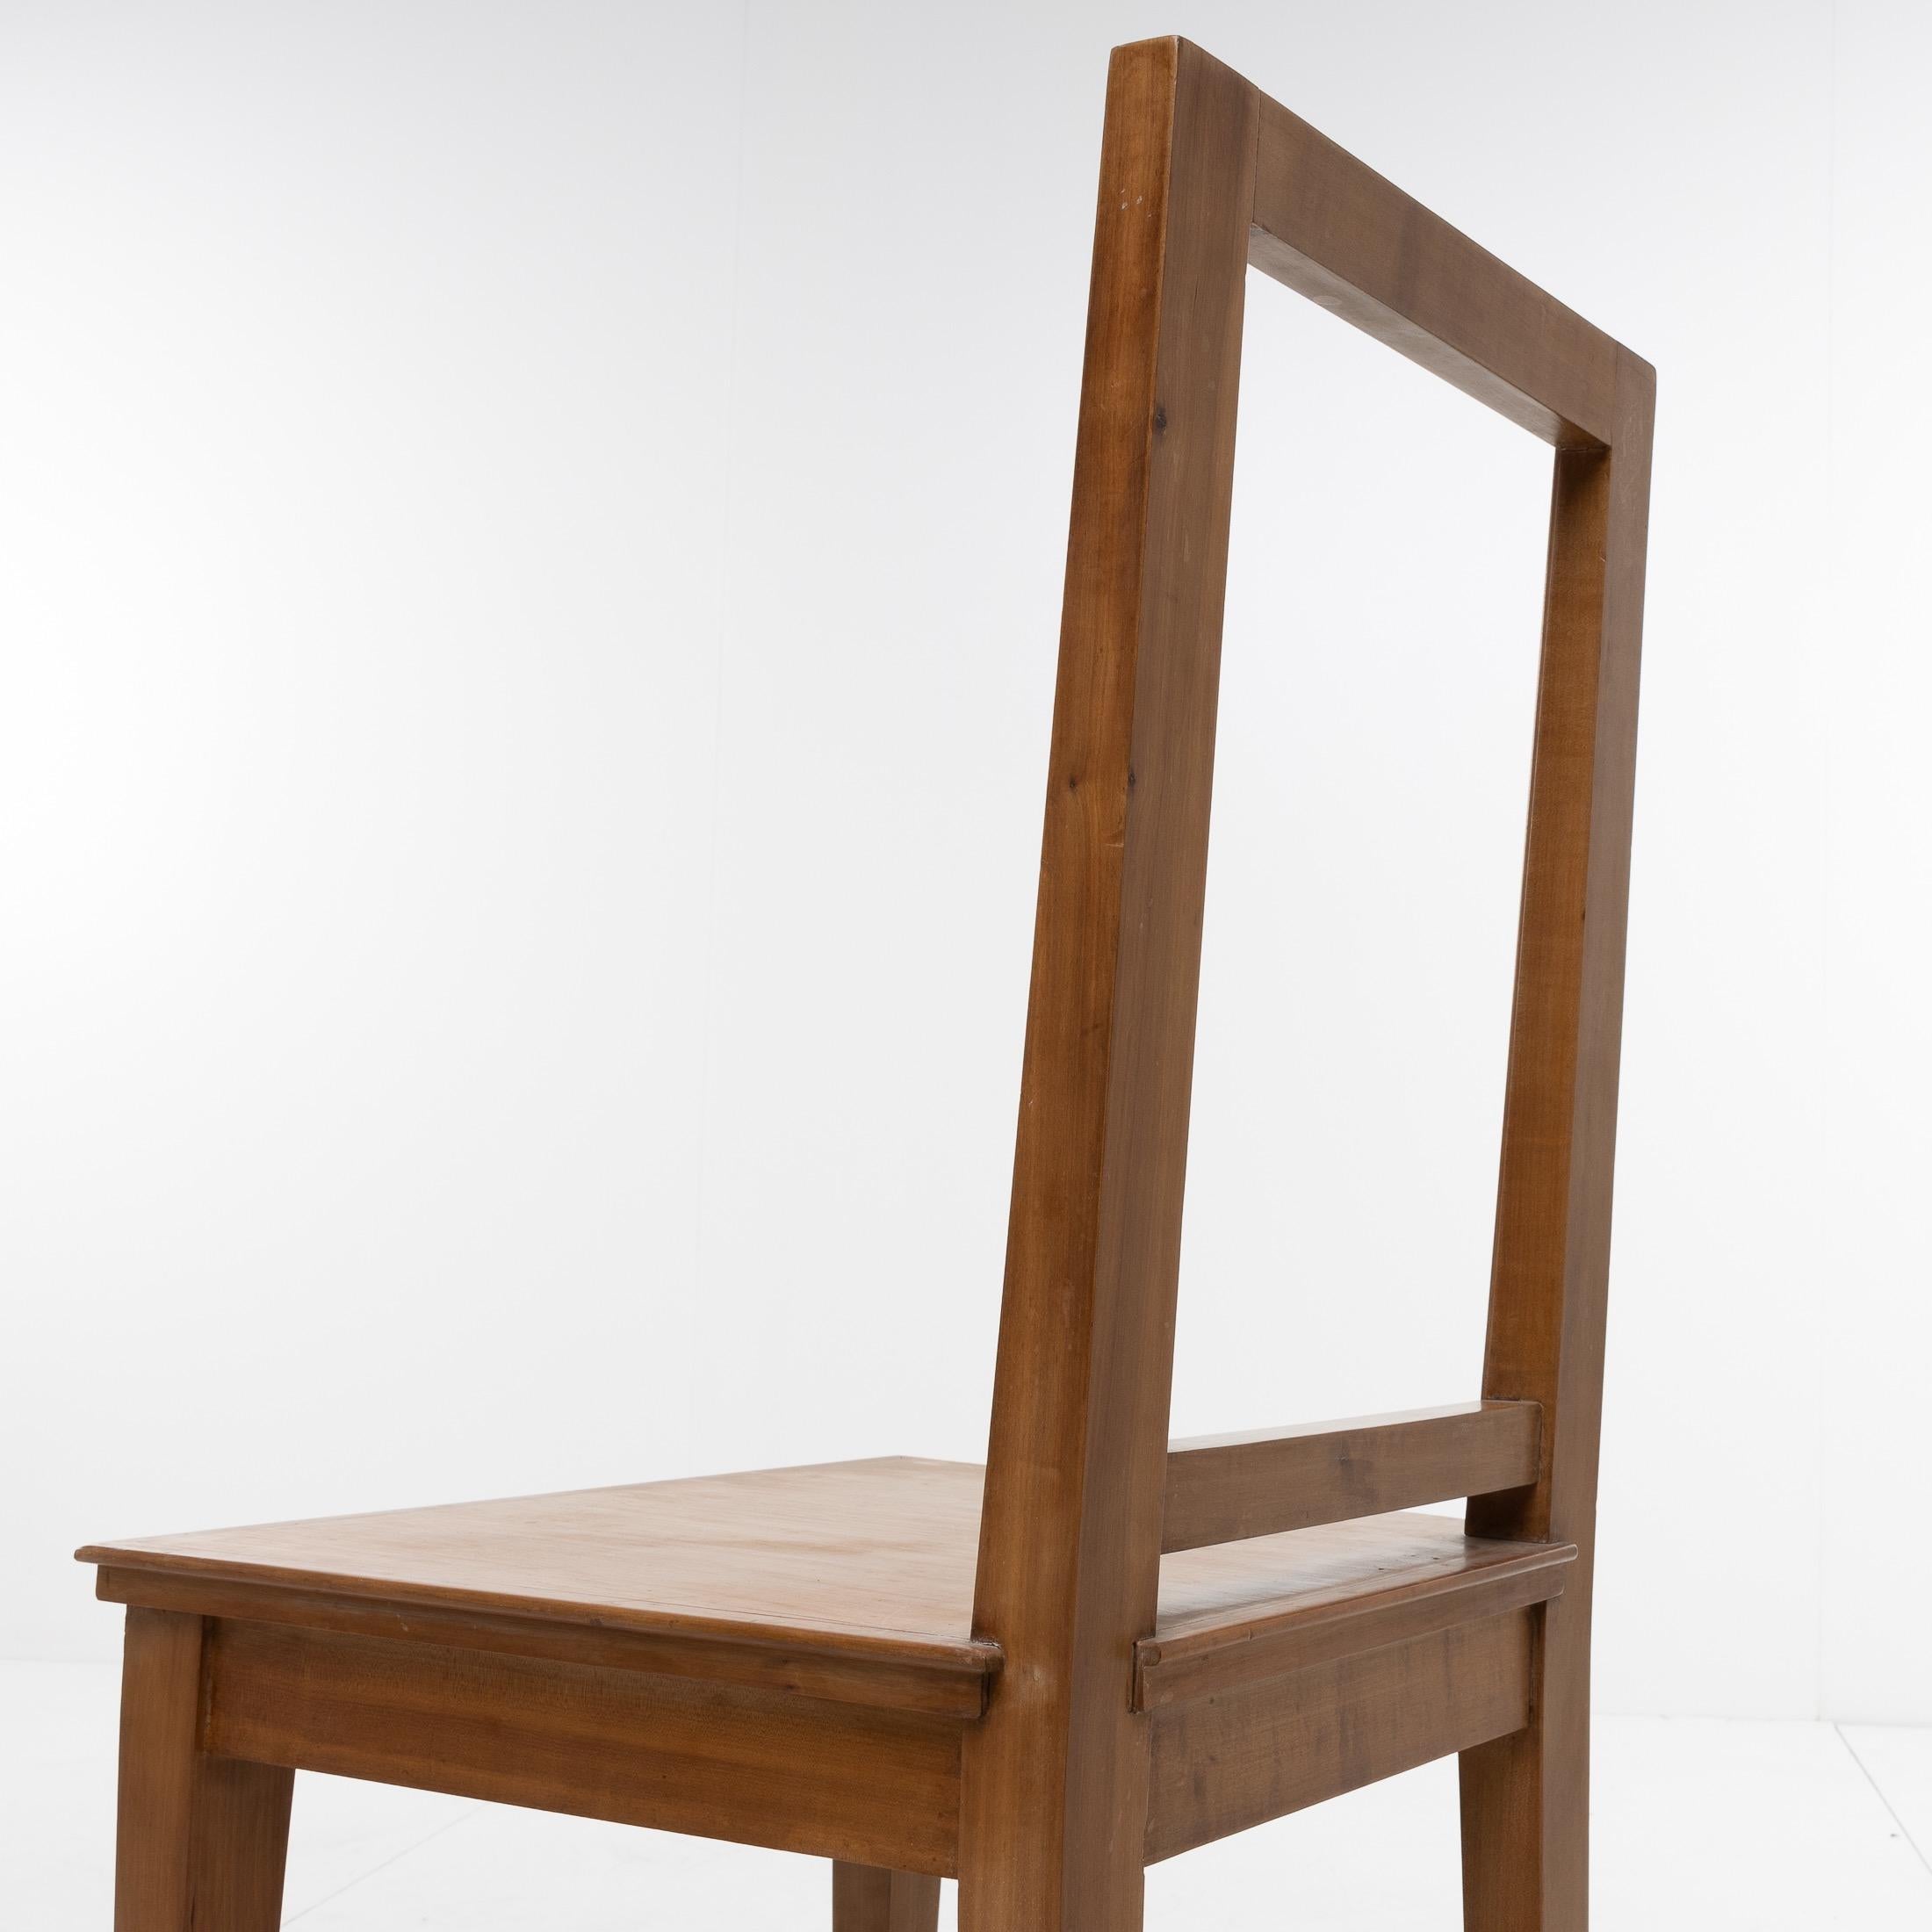 Fruitwood André Arbus, France, an Elegant Set of 4 Cherrywood Chairs